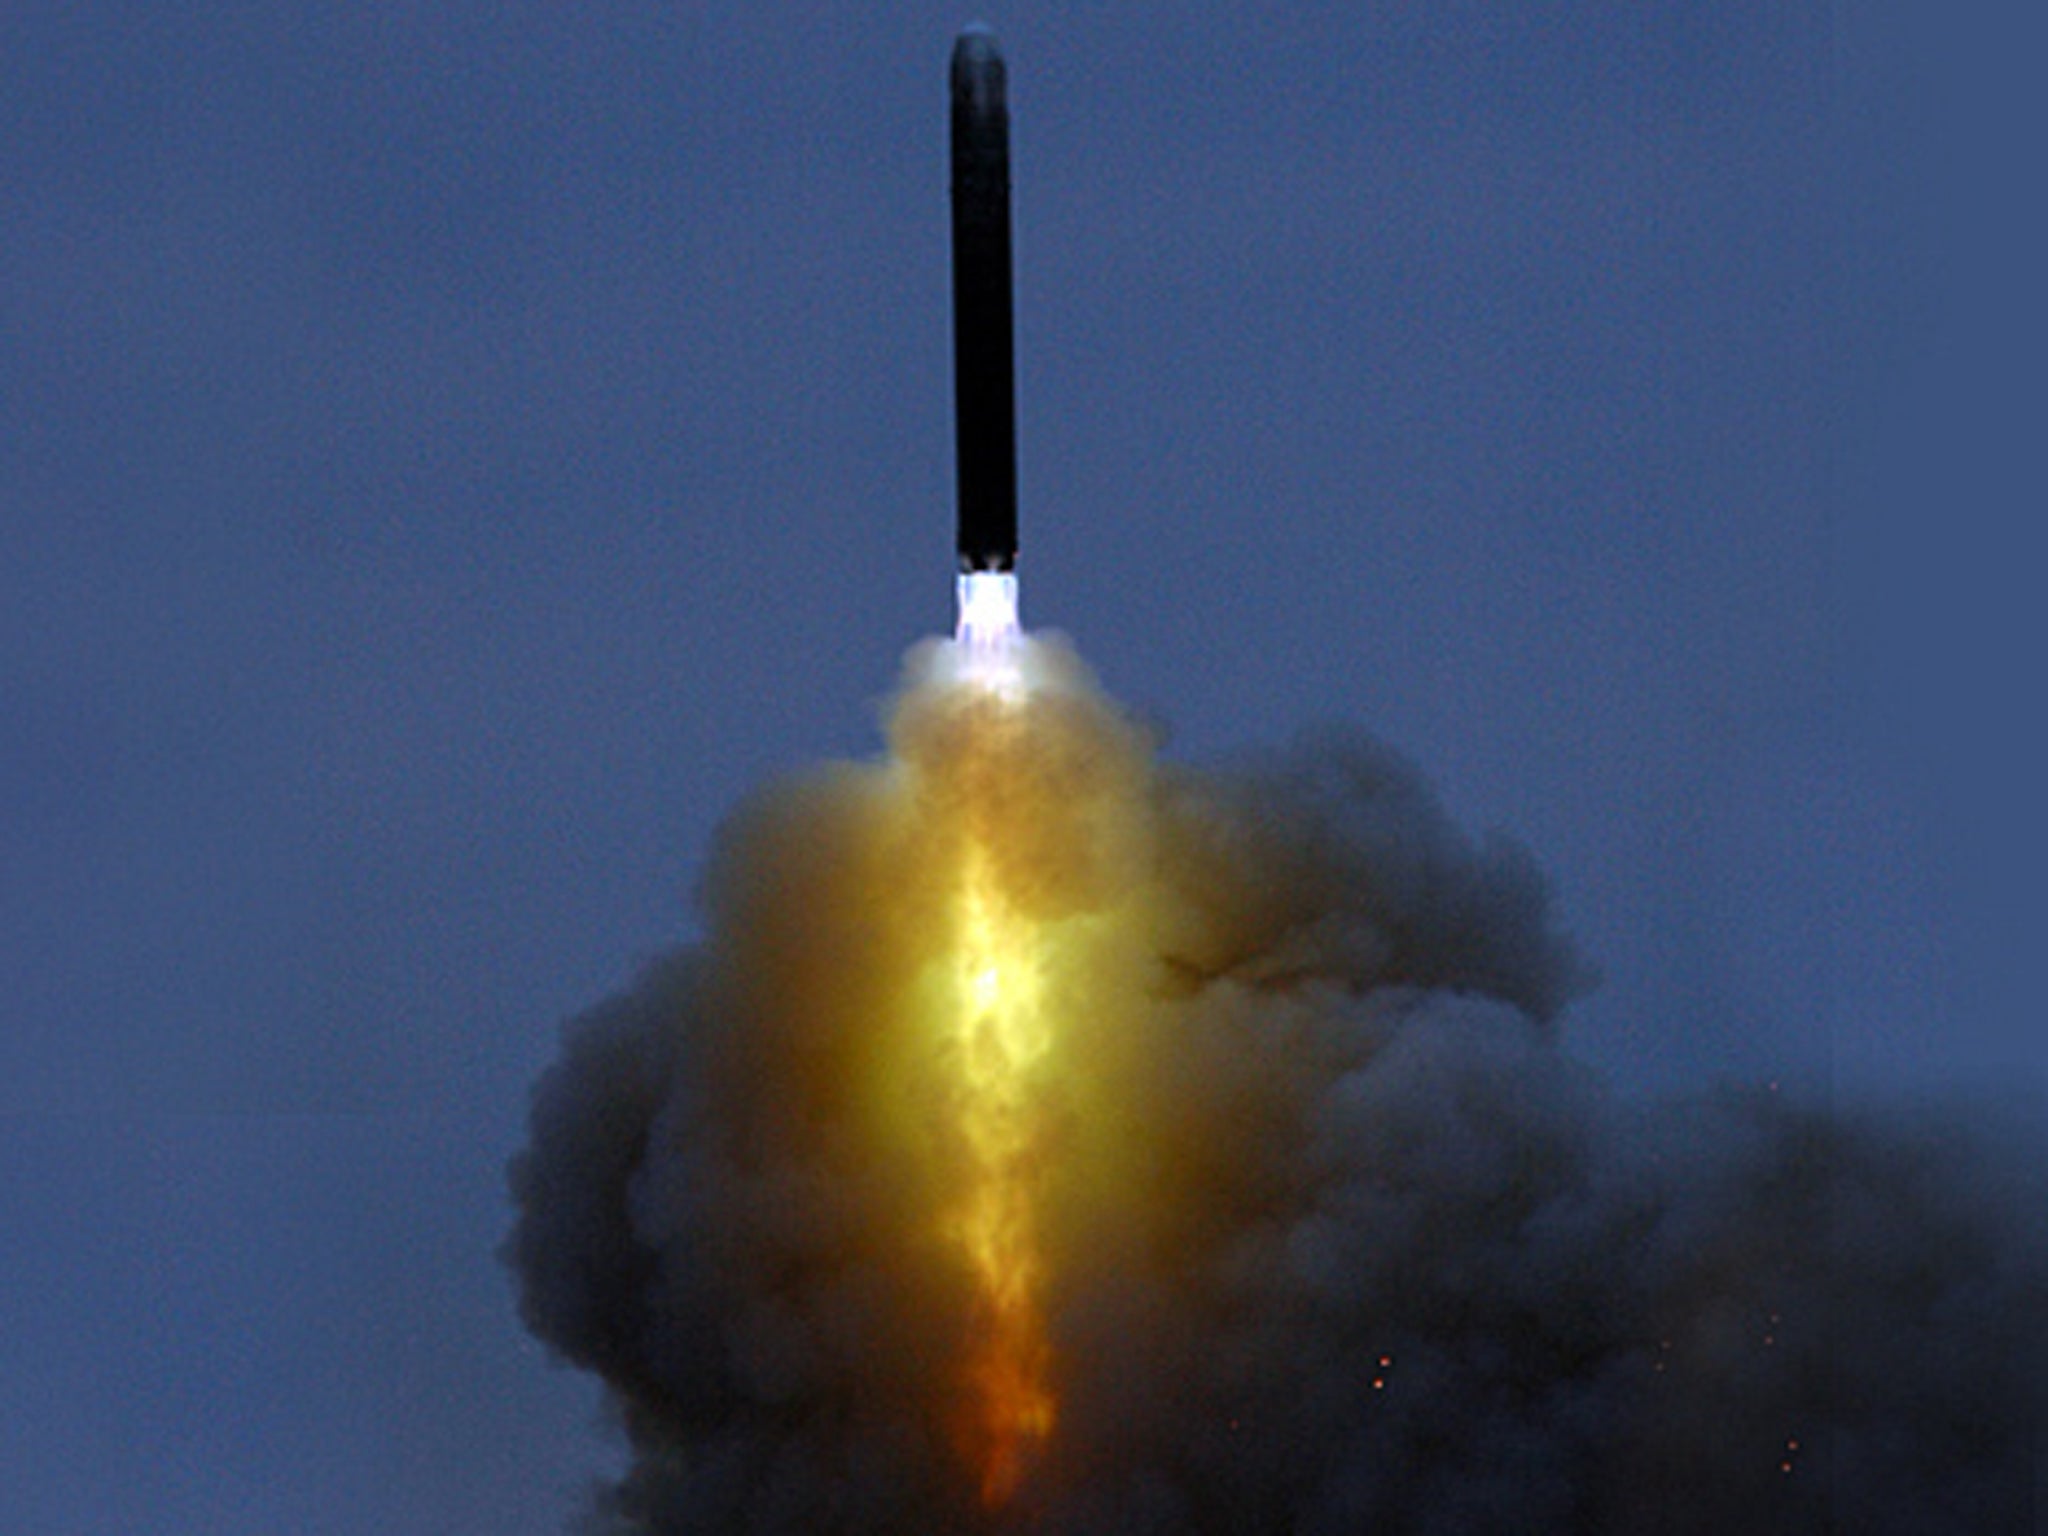 The launch of a Russian intercontinental ballistic missile designed for the delivery of nuclear weapons